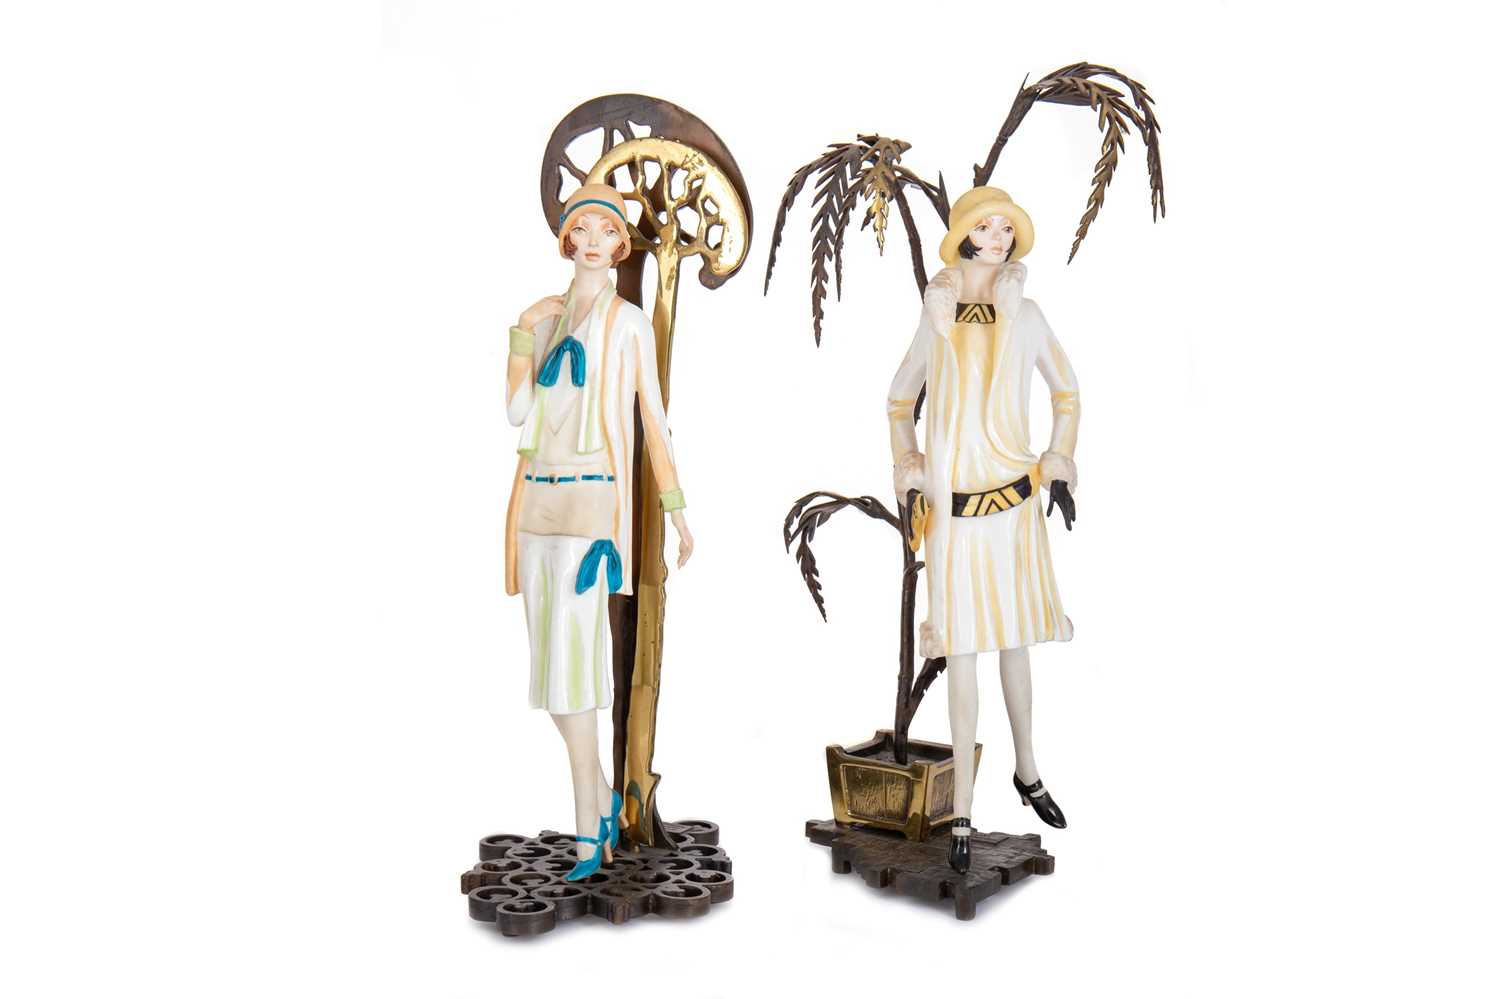 ALBANY CHINA, TWO ART DECO-STYLE FIGURES,